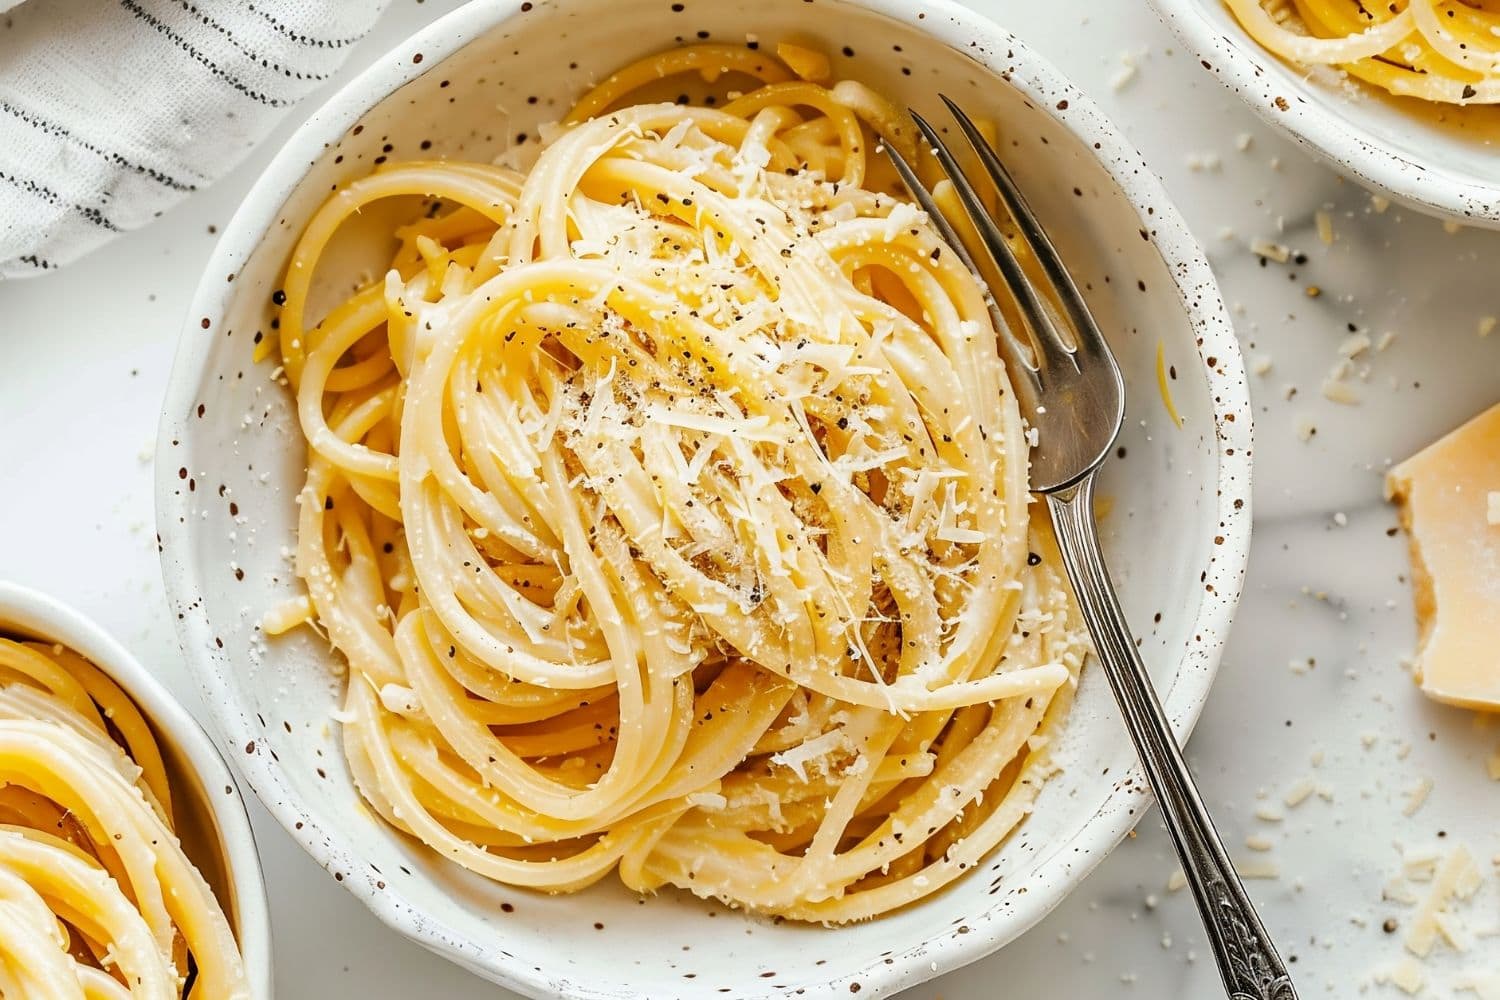 Top View of Cacio e Pepe in a Bowl with a Fork